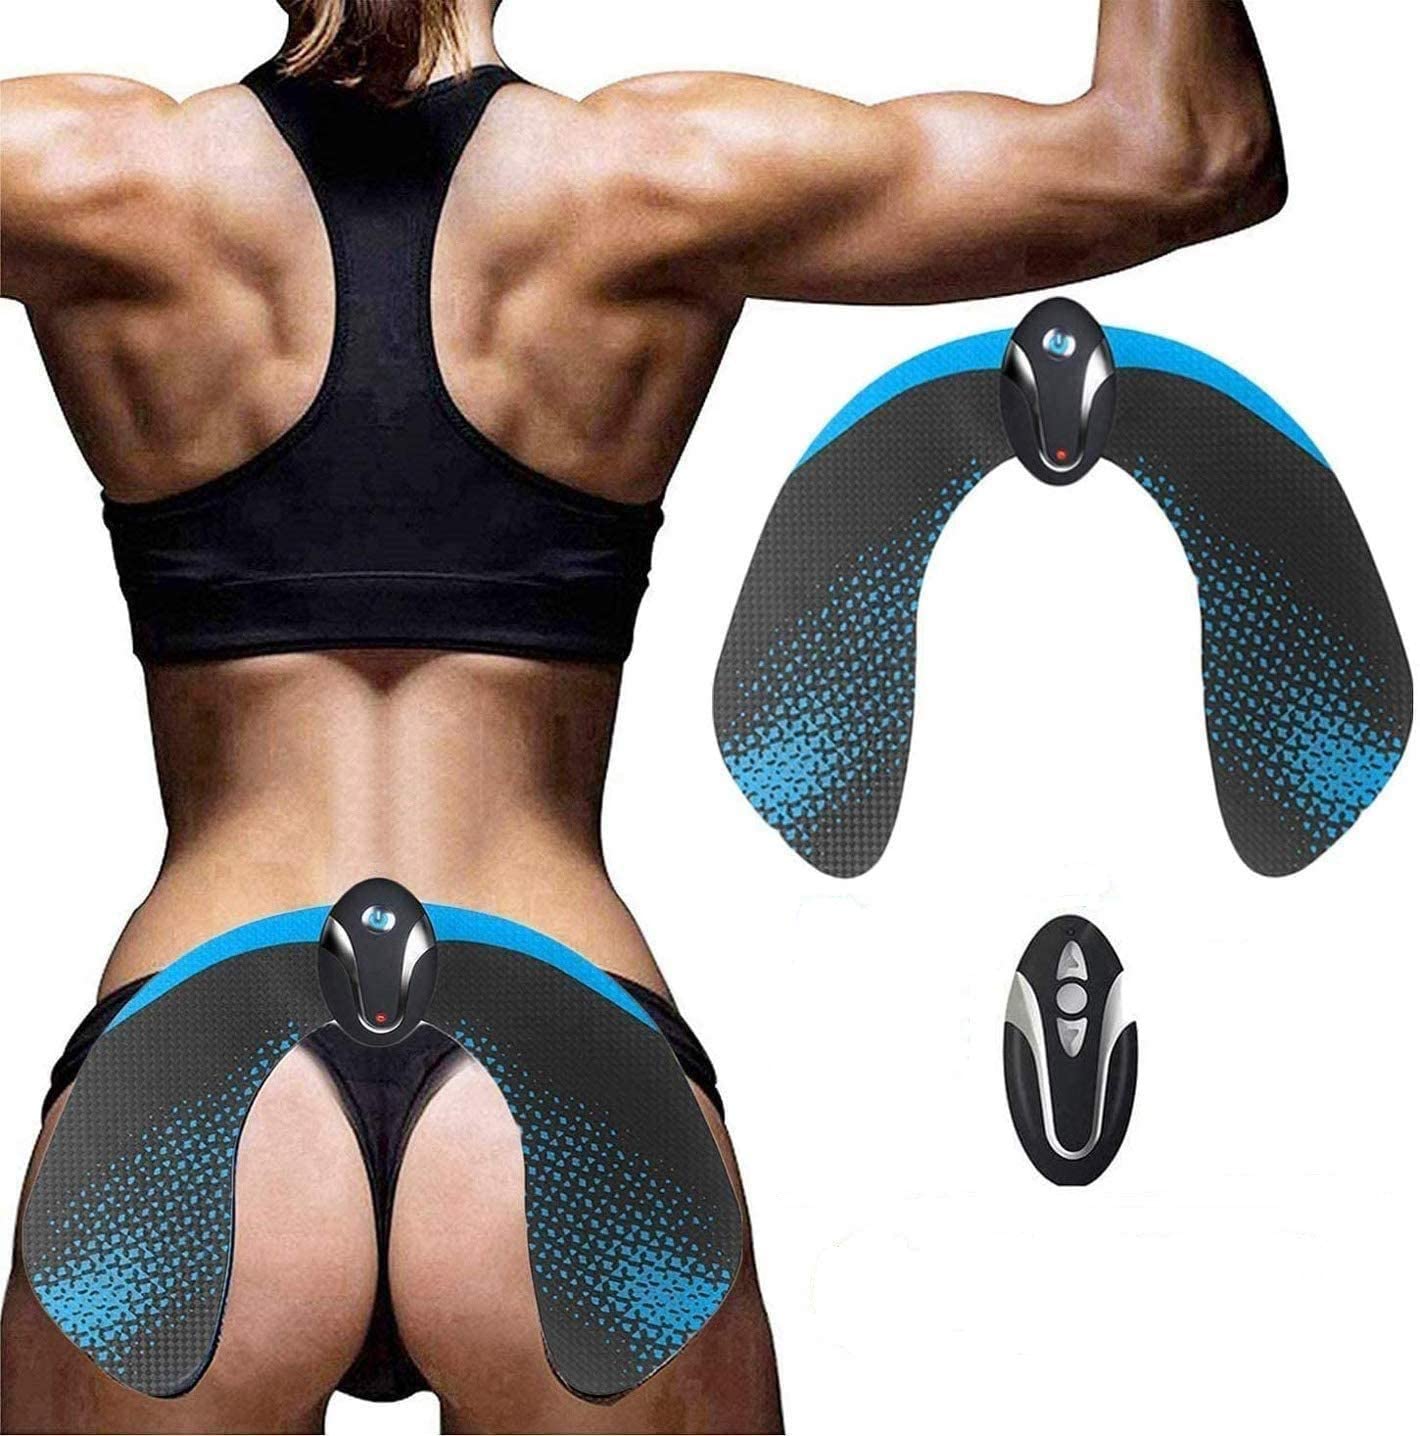 Review of Ben Belle Abs Stimulator and Hips Trainer